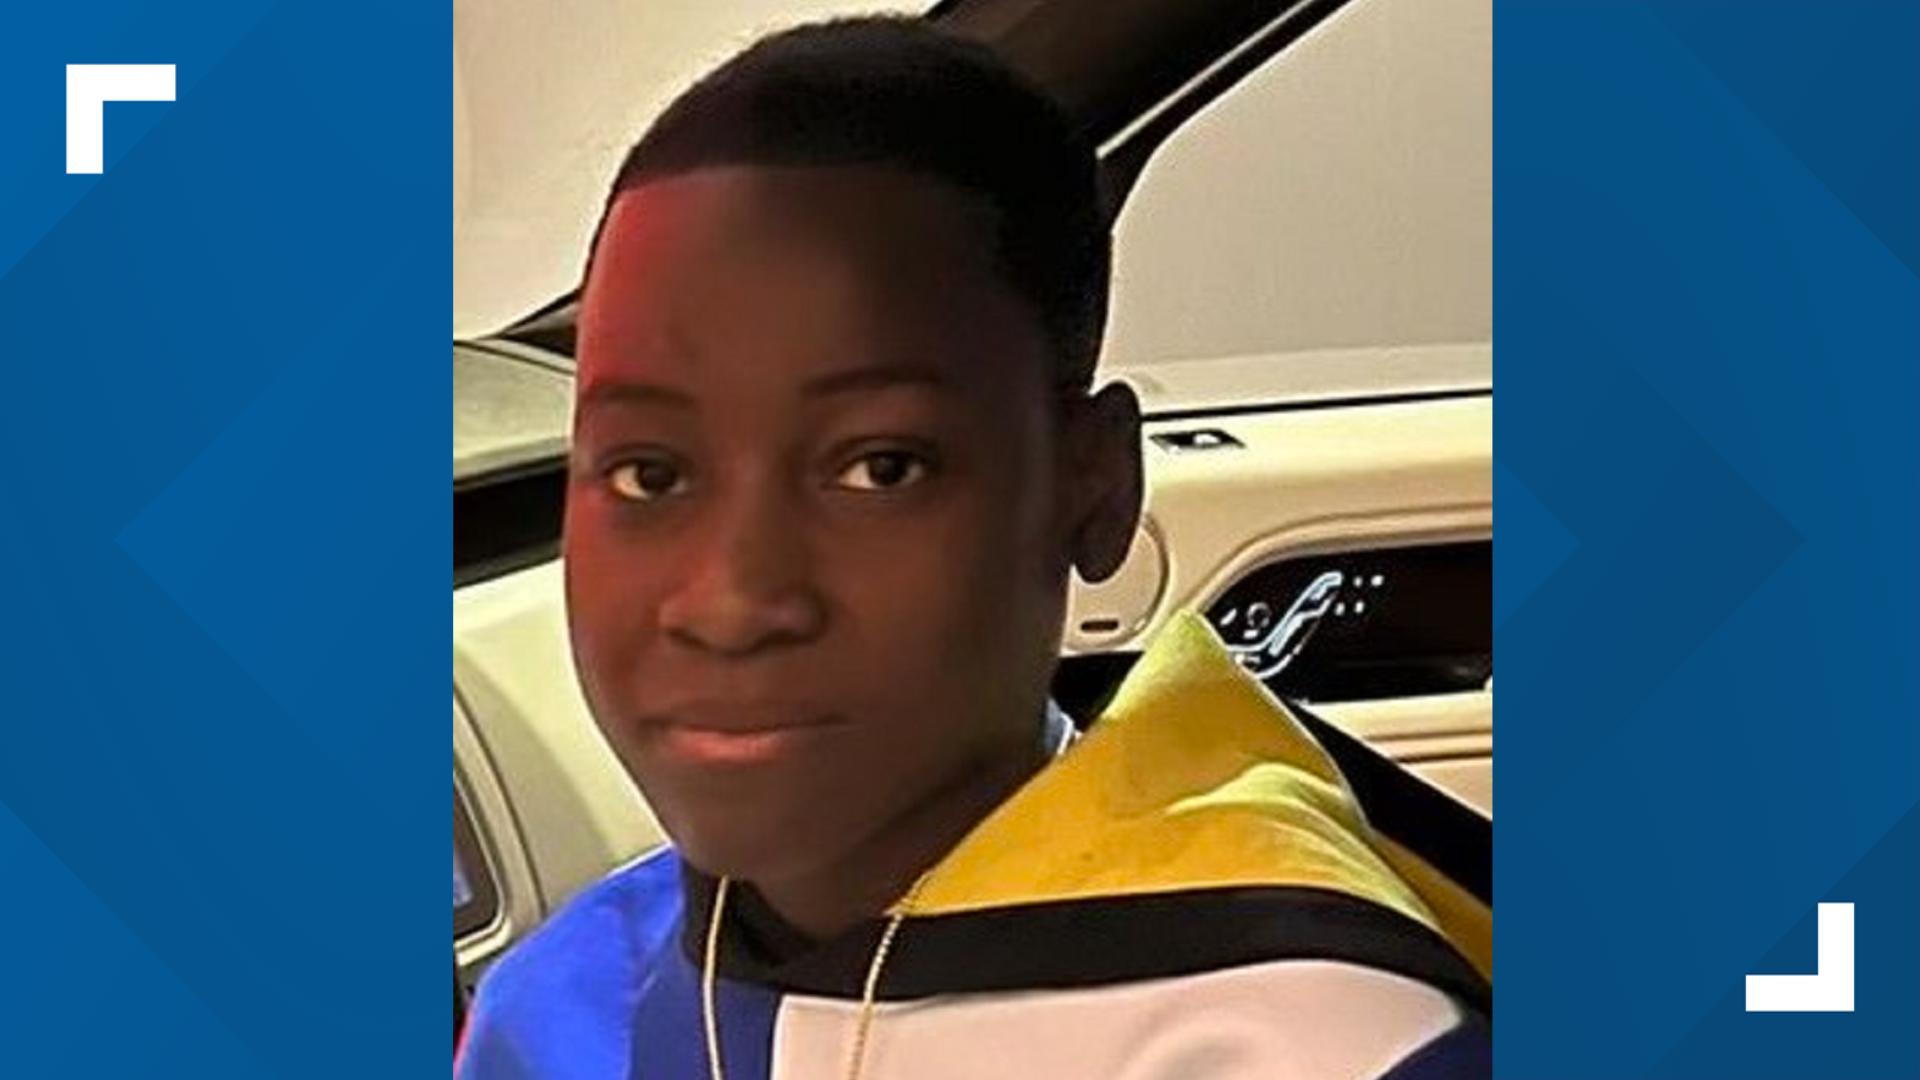 Justin Johnson, 16, died last Friday night at Hershey Medical Center after going into cardiac arrest at his Lower Paxton Township home, police said Monday.